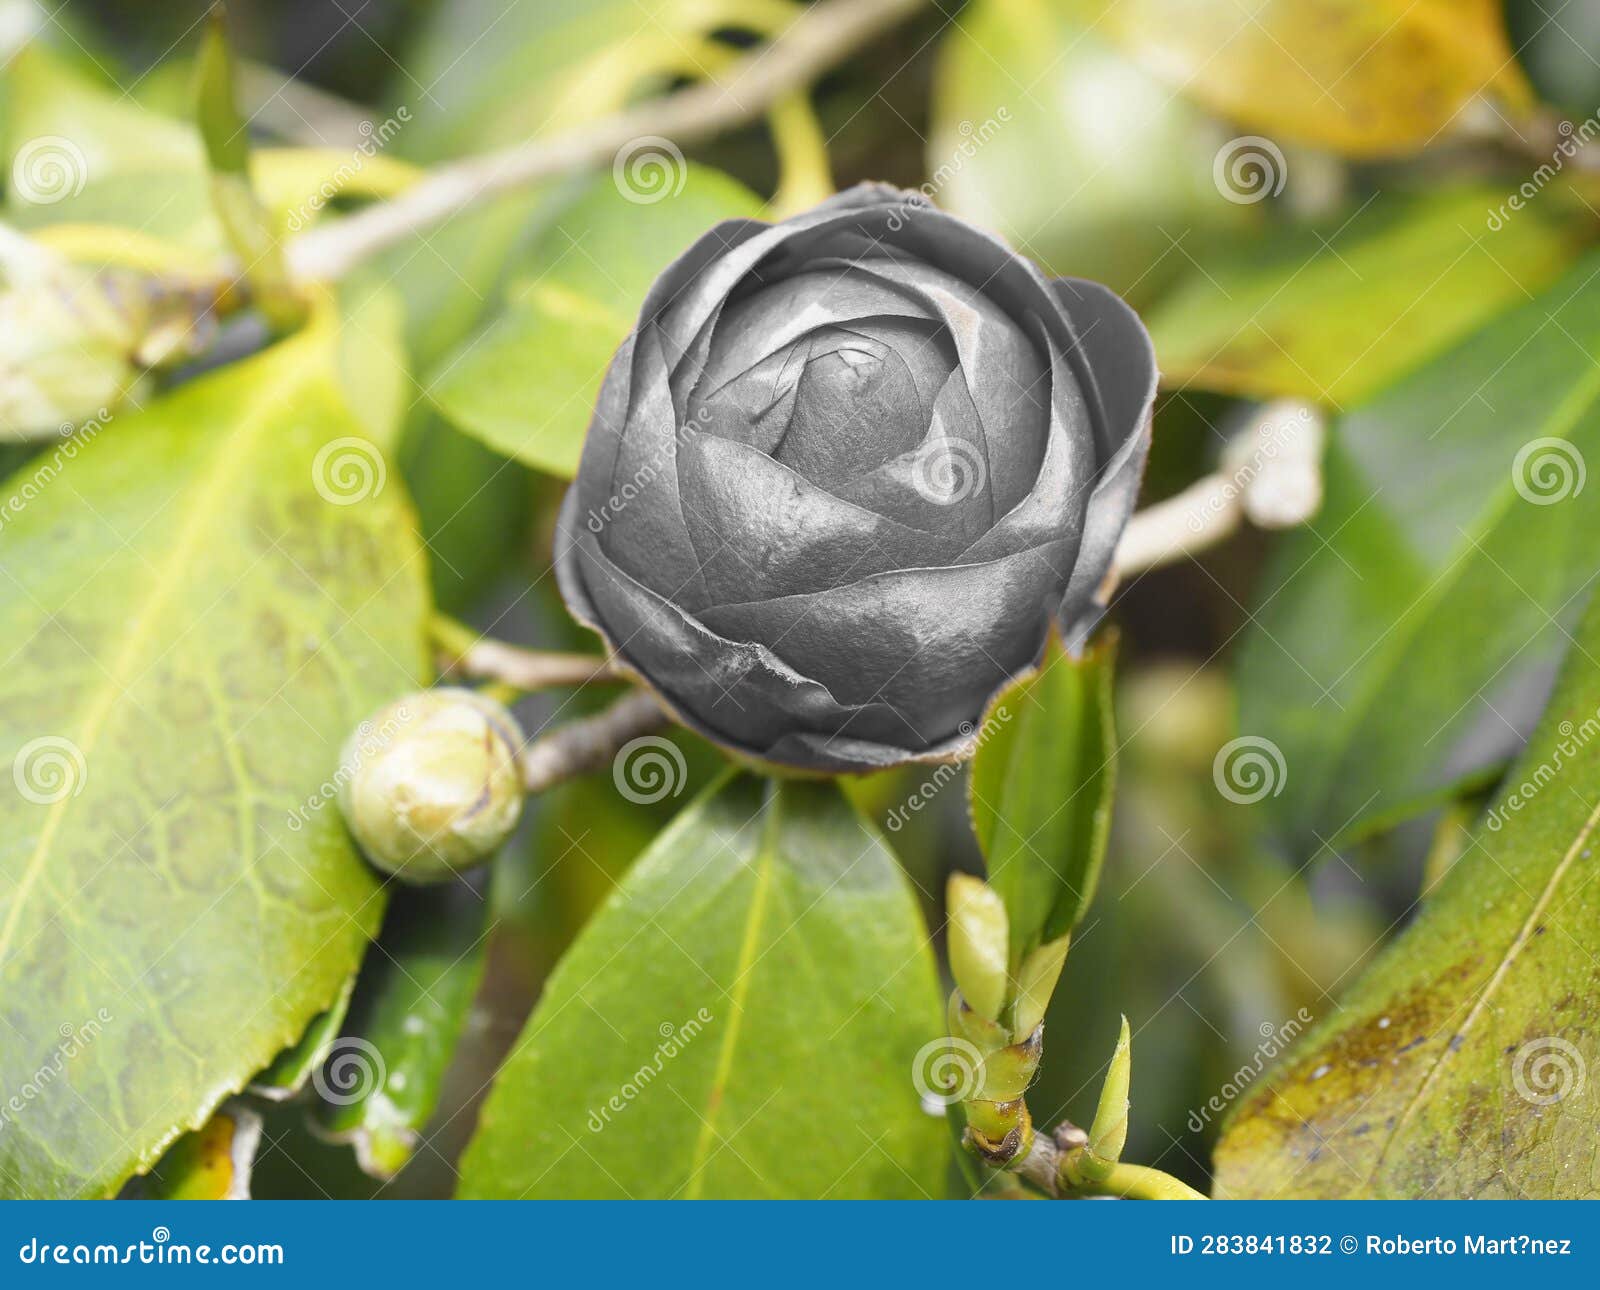 a beautiful boton of a camellia flower